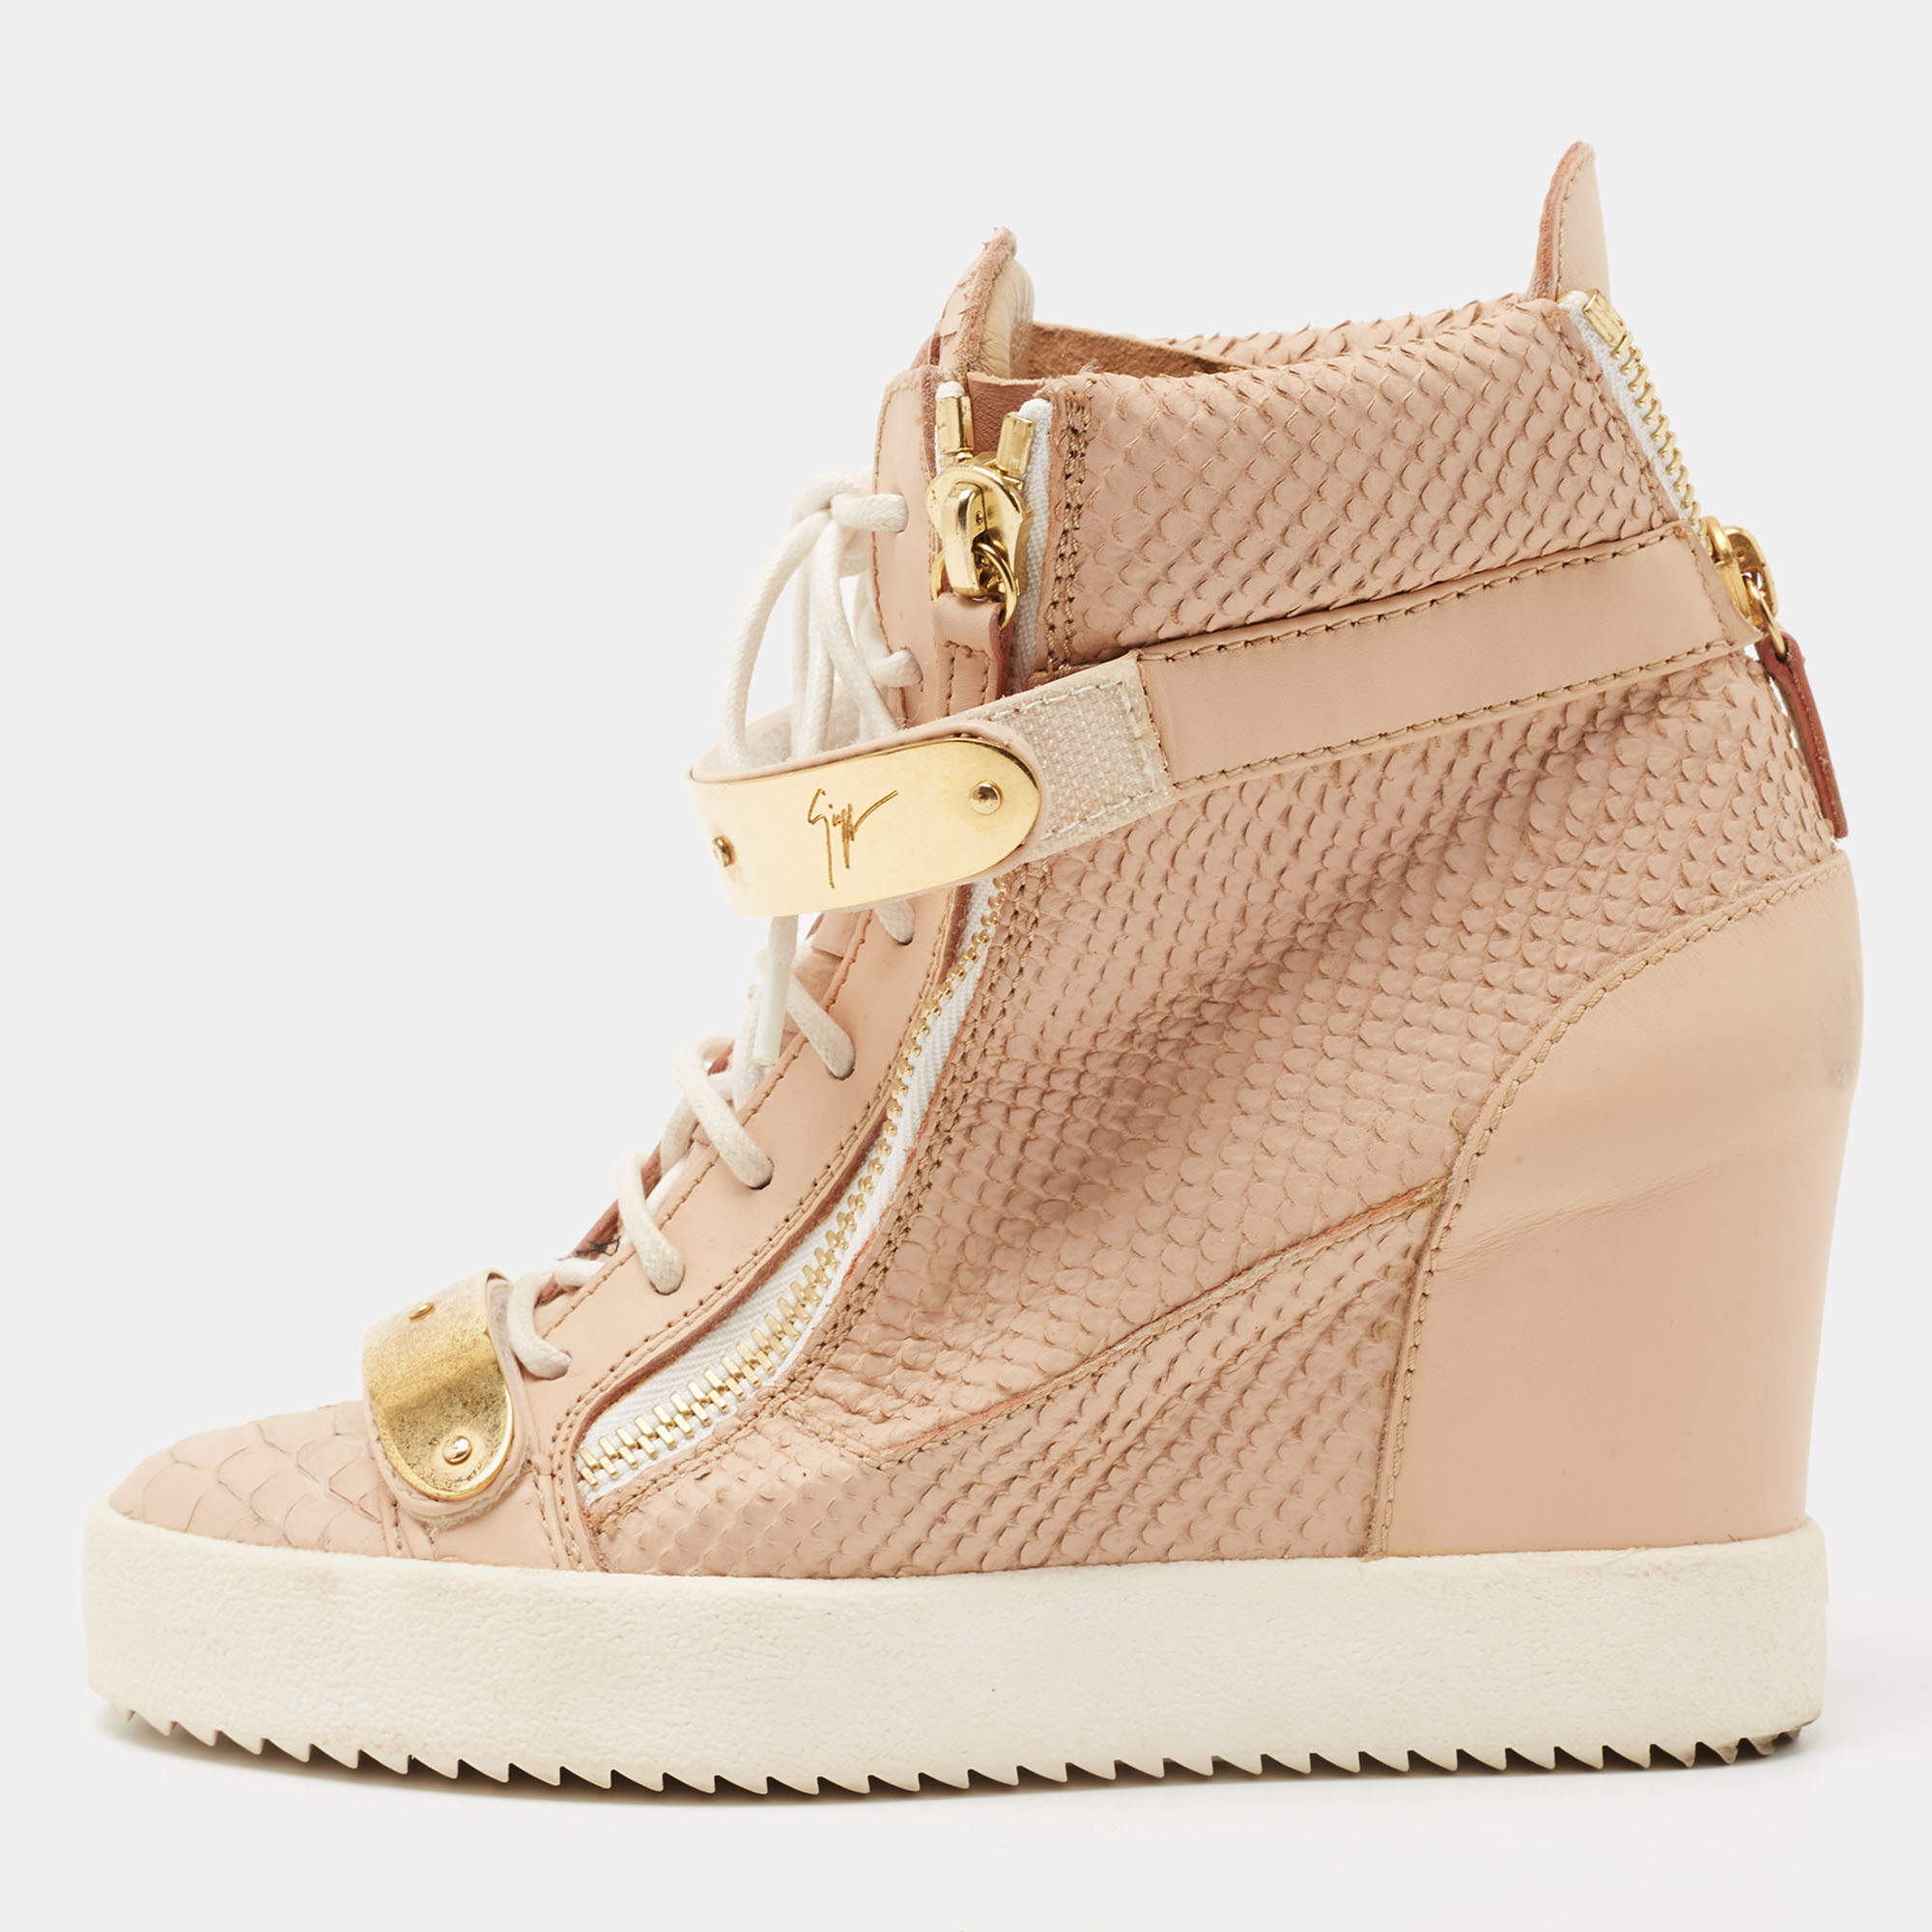 Giuseppe Zanotti Peach Pink Python Embossed Leather Coby Wedge Sneakers Size 38